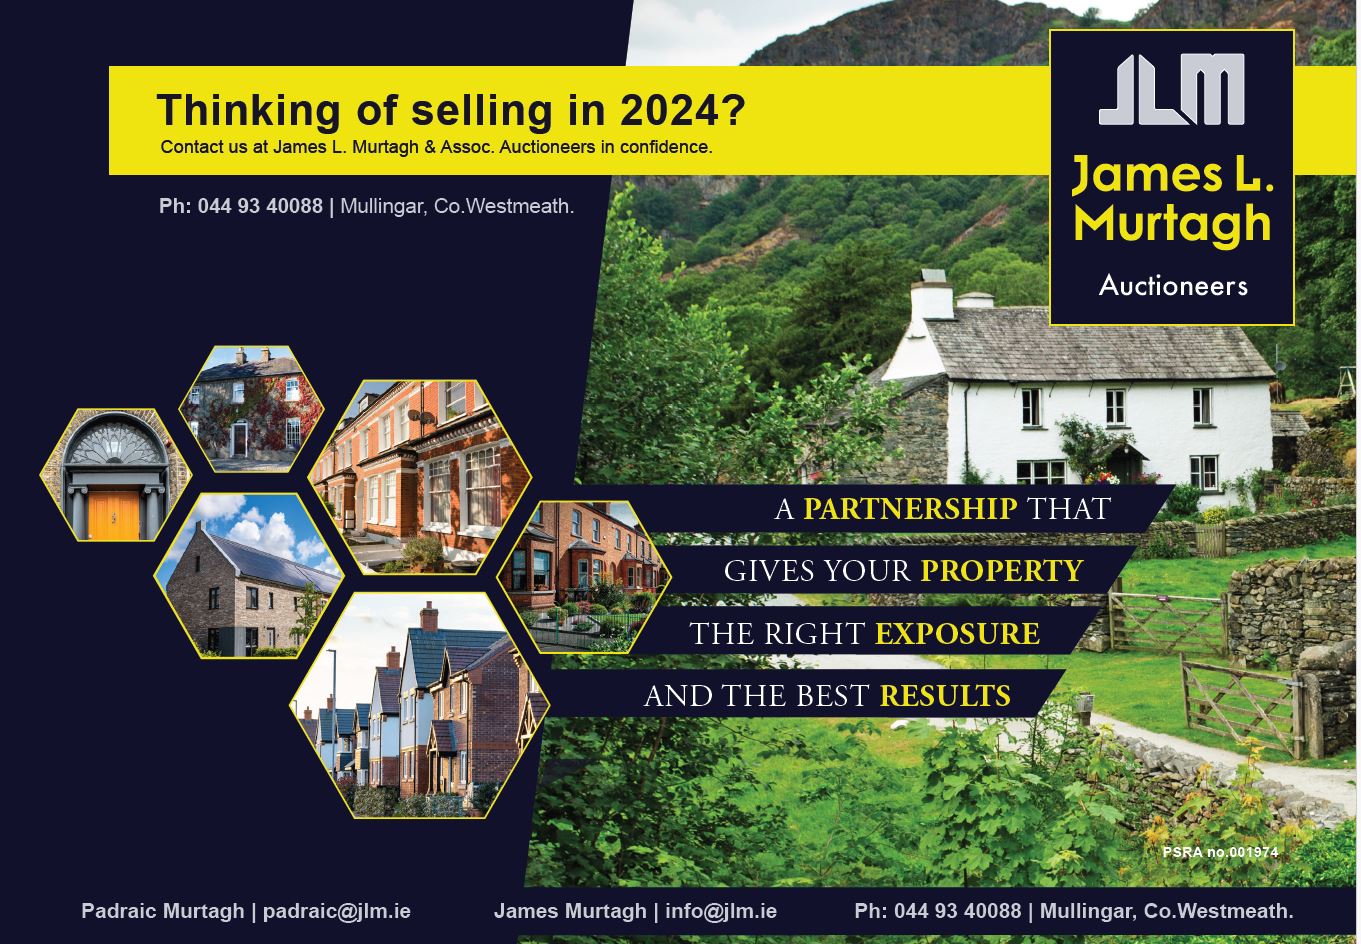 Thinking of Selling in 2024?